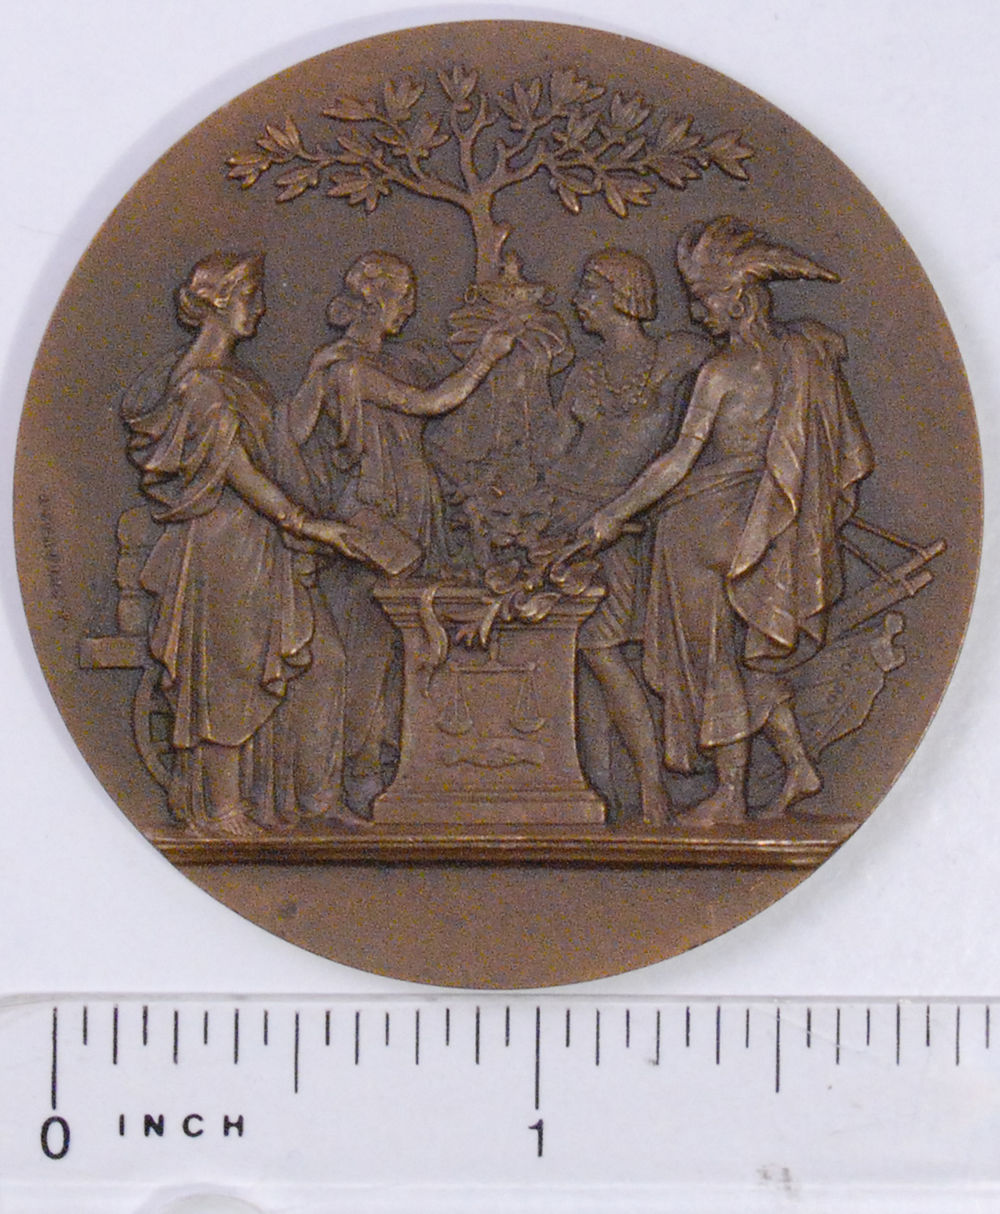 1904 ST. LOUIS WORLD'S FAIR BRONZE MEDAL CHOICE UNC-ONE OF THE NICEST EXAMPLES